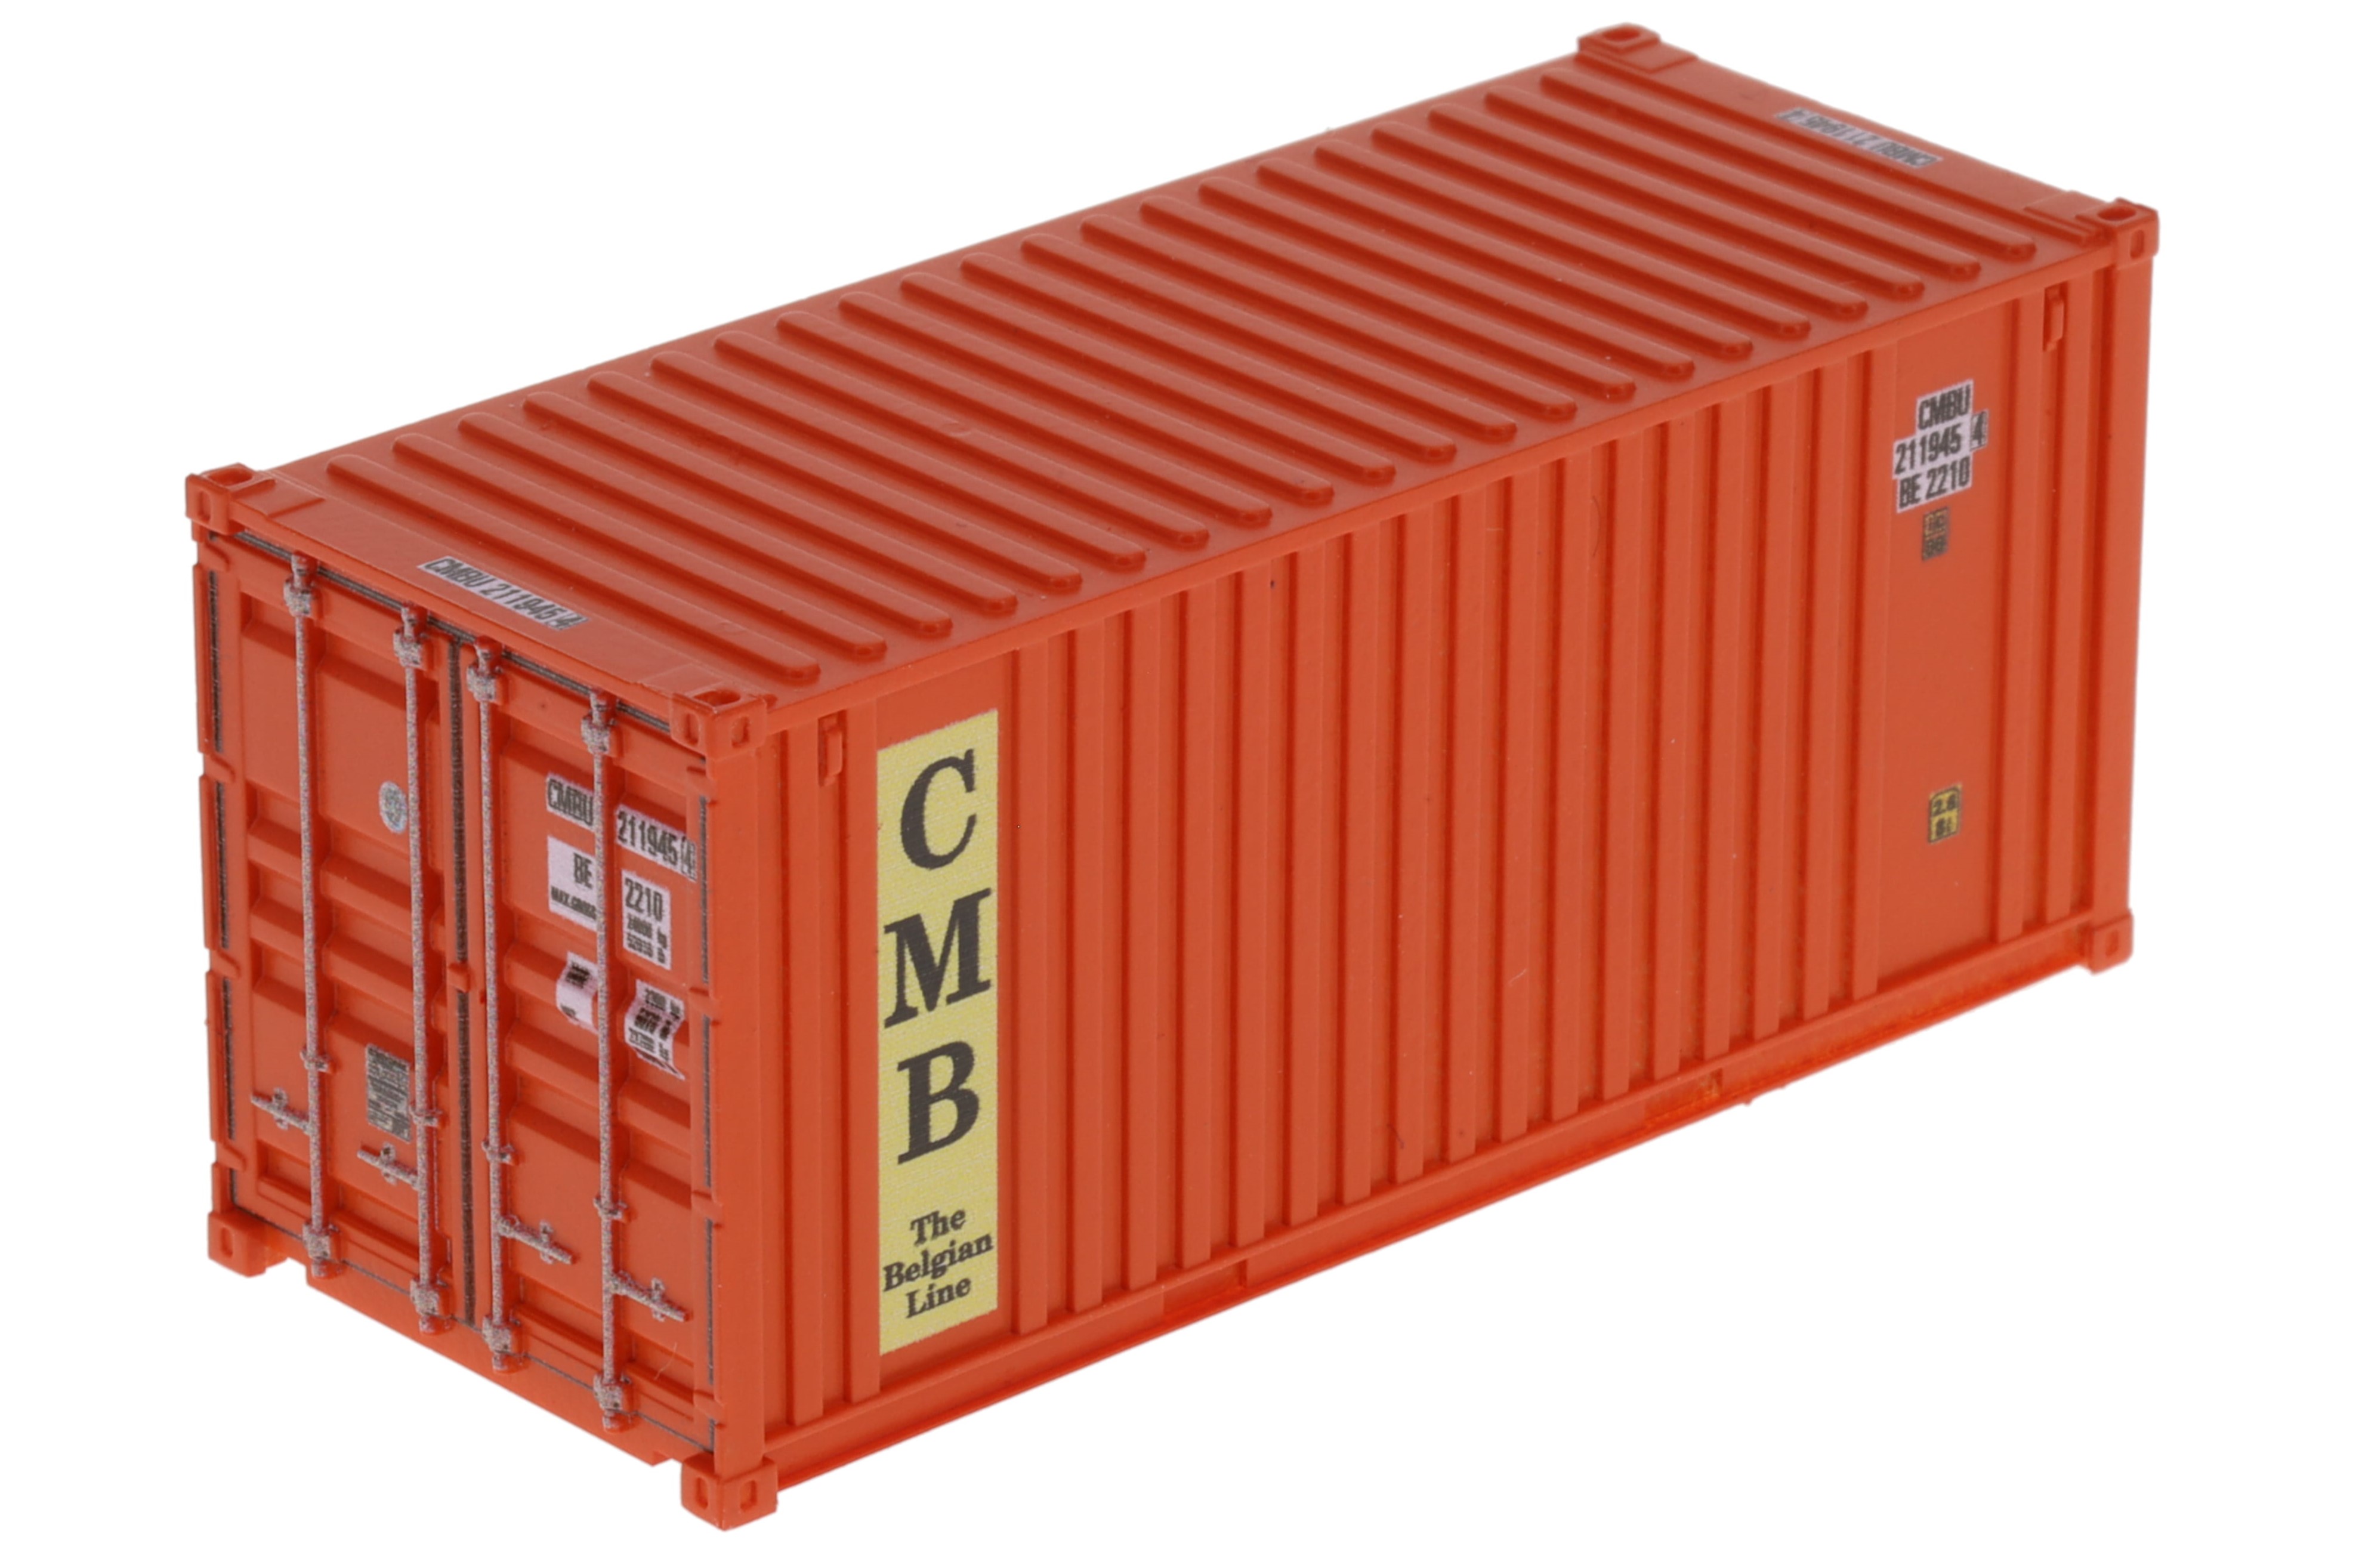 Container 20´Flat Panel CMB "The Belgian Line", Behälternummer: CMBU 211945